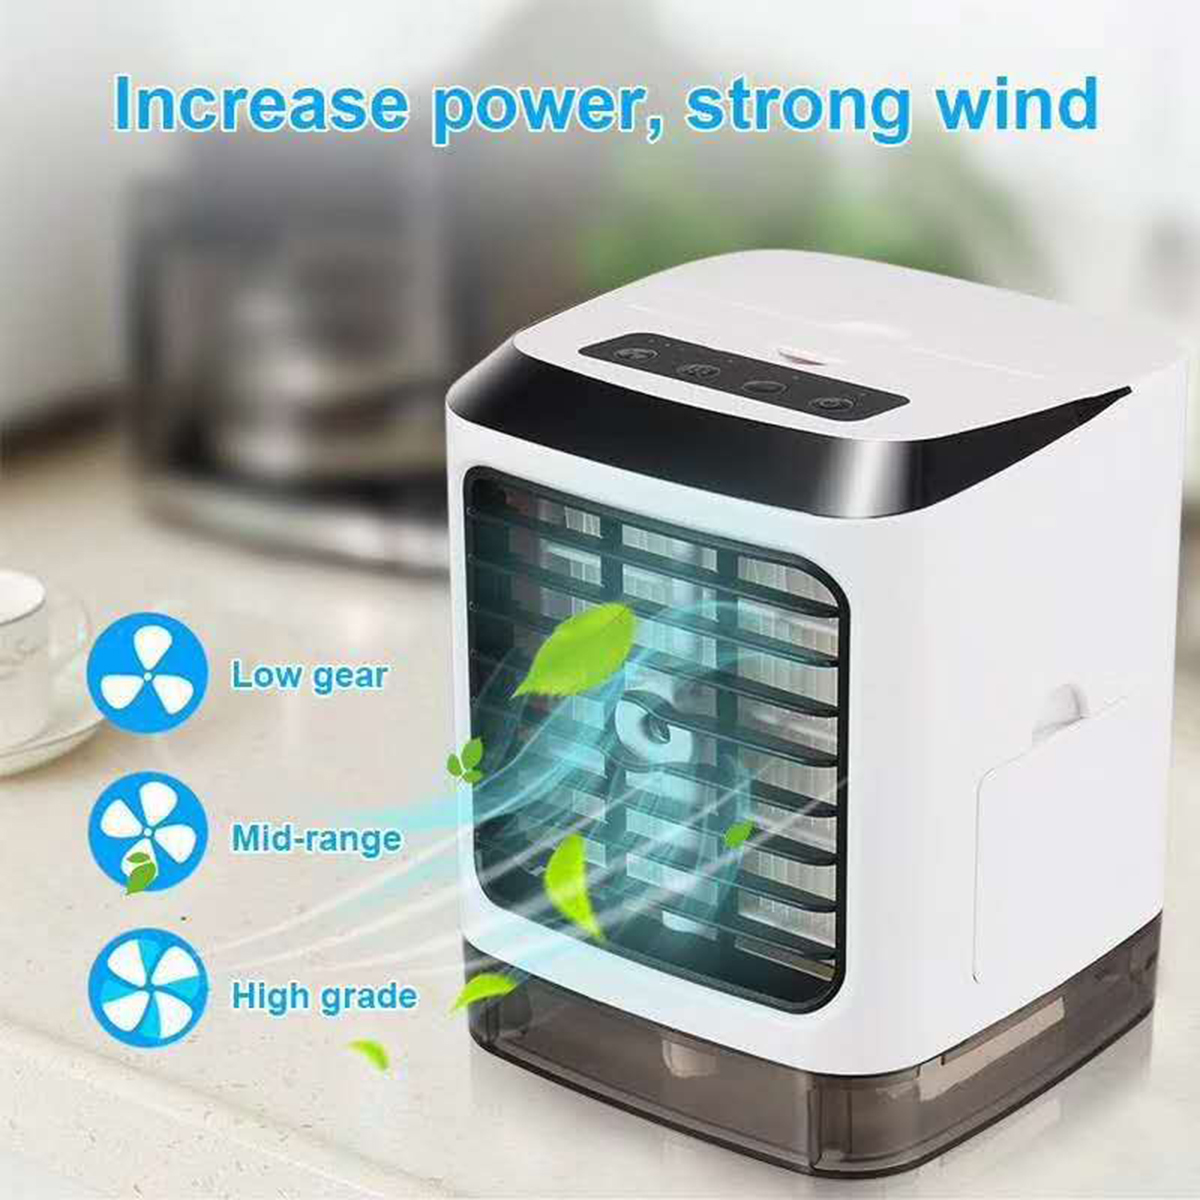 LED-480mL-Personal-Evaporative-Air-Cooler-Humidifier-Portable-Air-Conditioner-Mist-Prayer-USB-Cooler-1479420-5